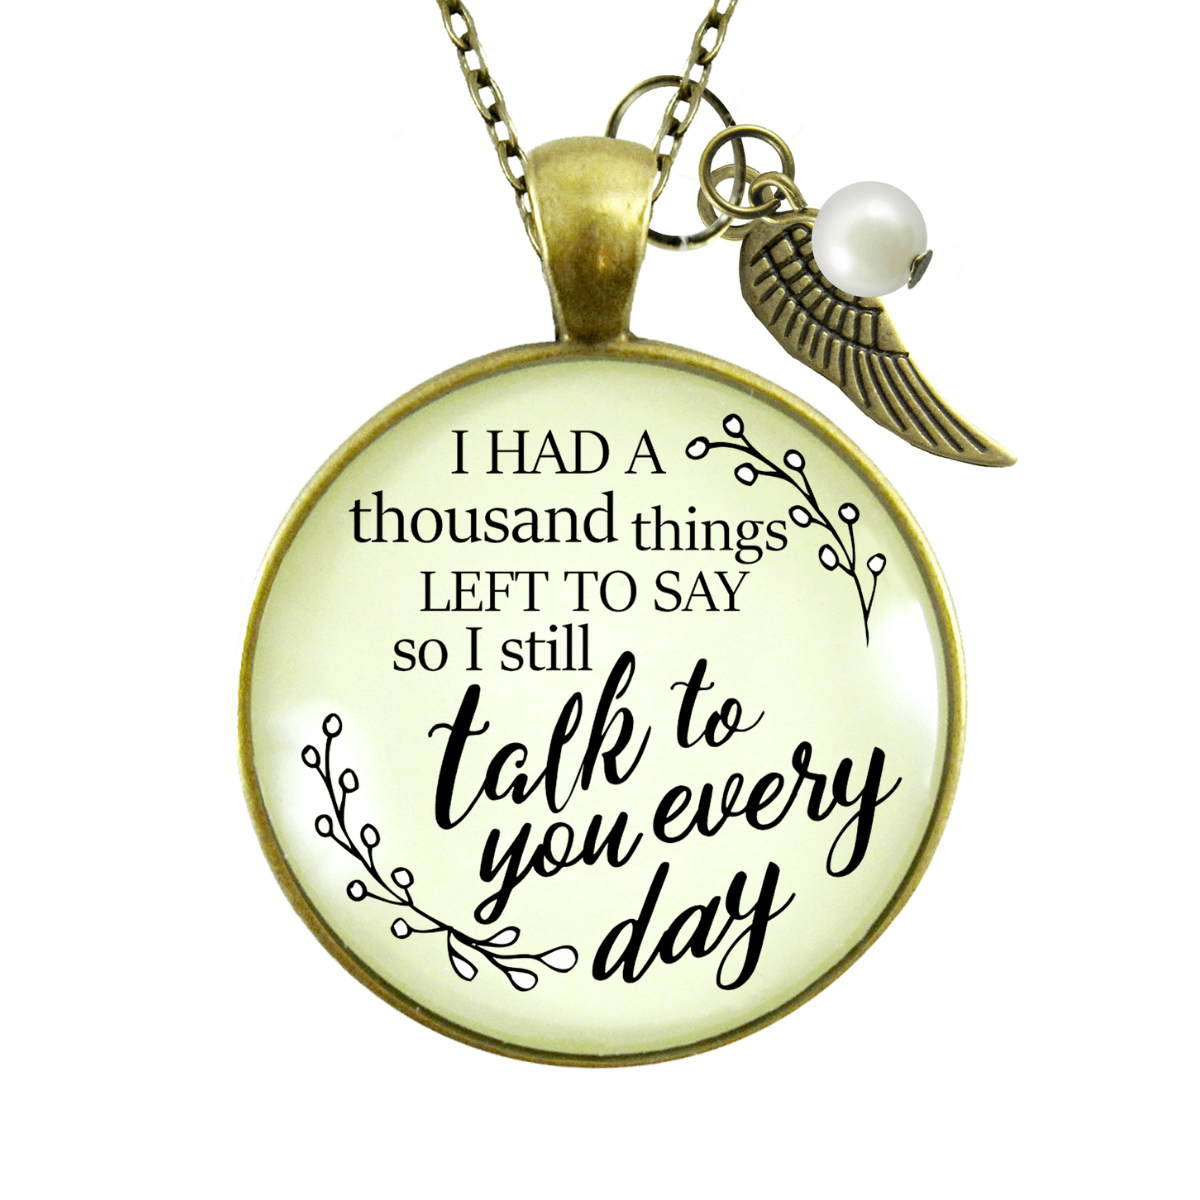 Gutsy Goodness Remembrance Necklace Thousand Things Miss You Memorial Jewelry - Gutsy Goodness;Remembrance Necklace Thousand Things Miss You Memorial Jewelry - Gutsy Goodness Handmade Jewelry Gifts